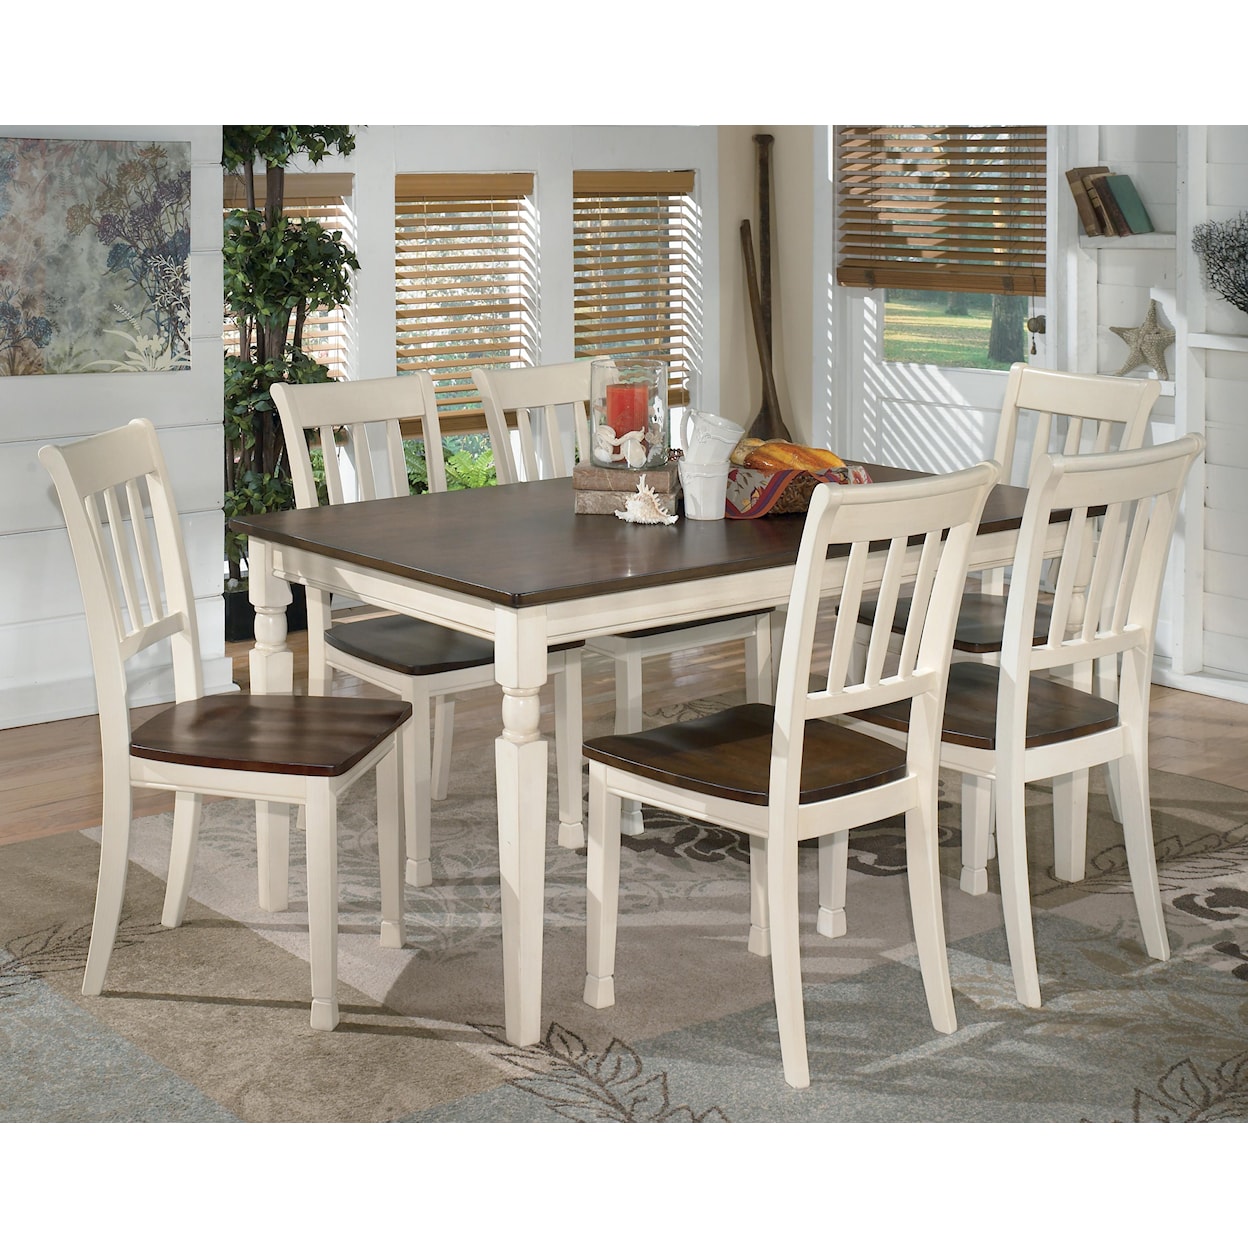 Signature Design by Ashley Whitesburg 7pc Dining Room Group